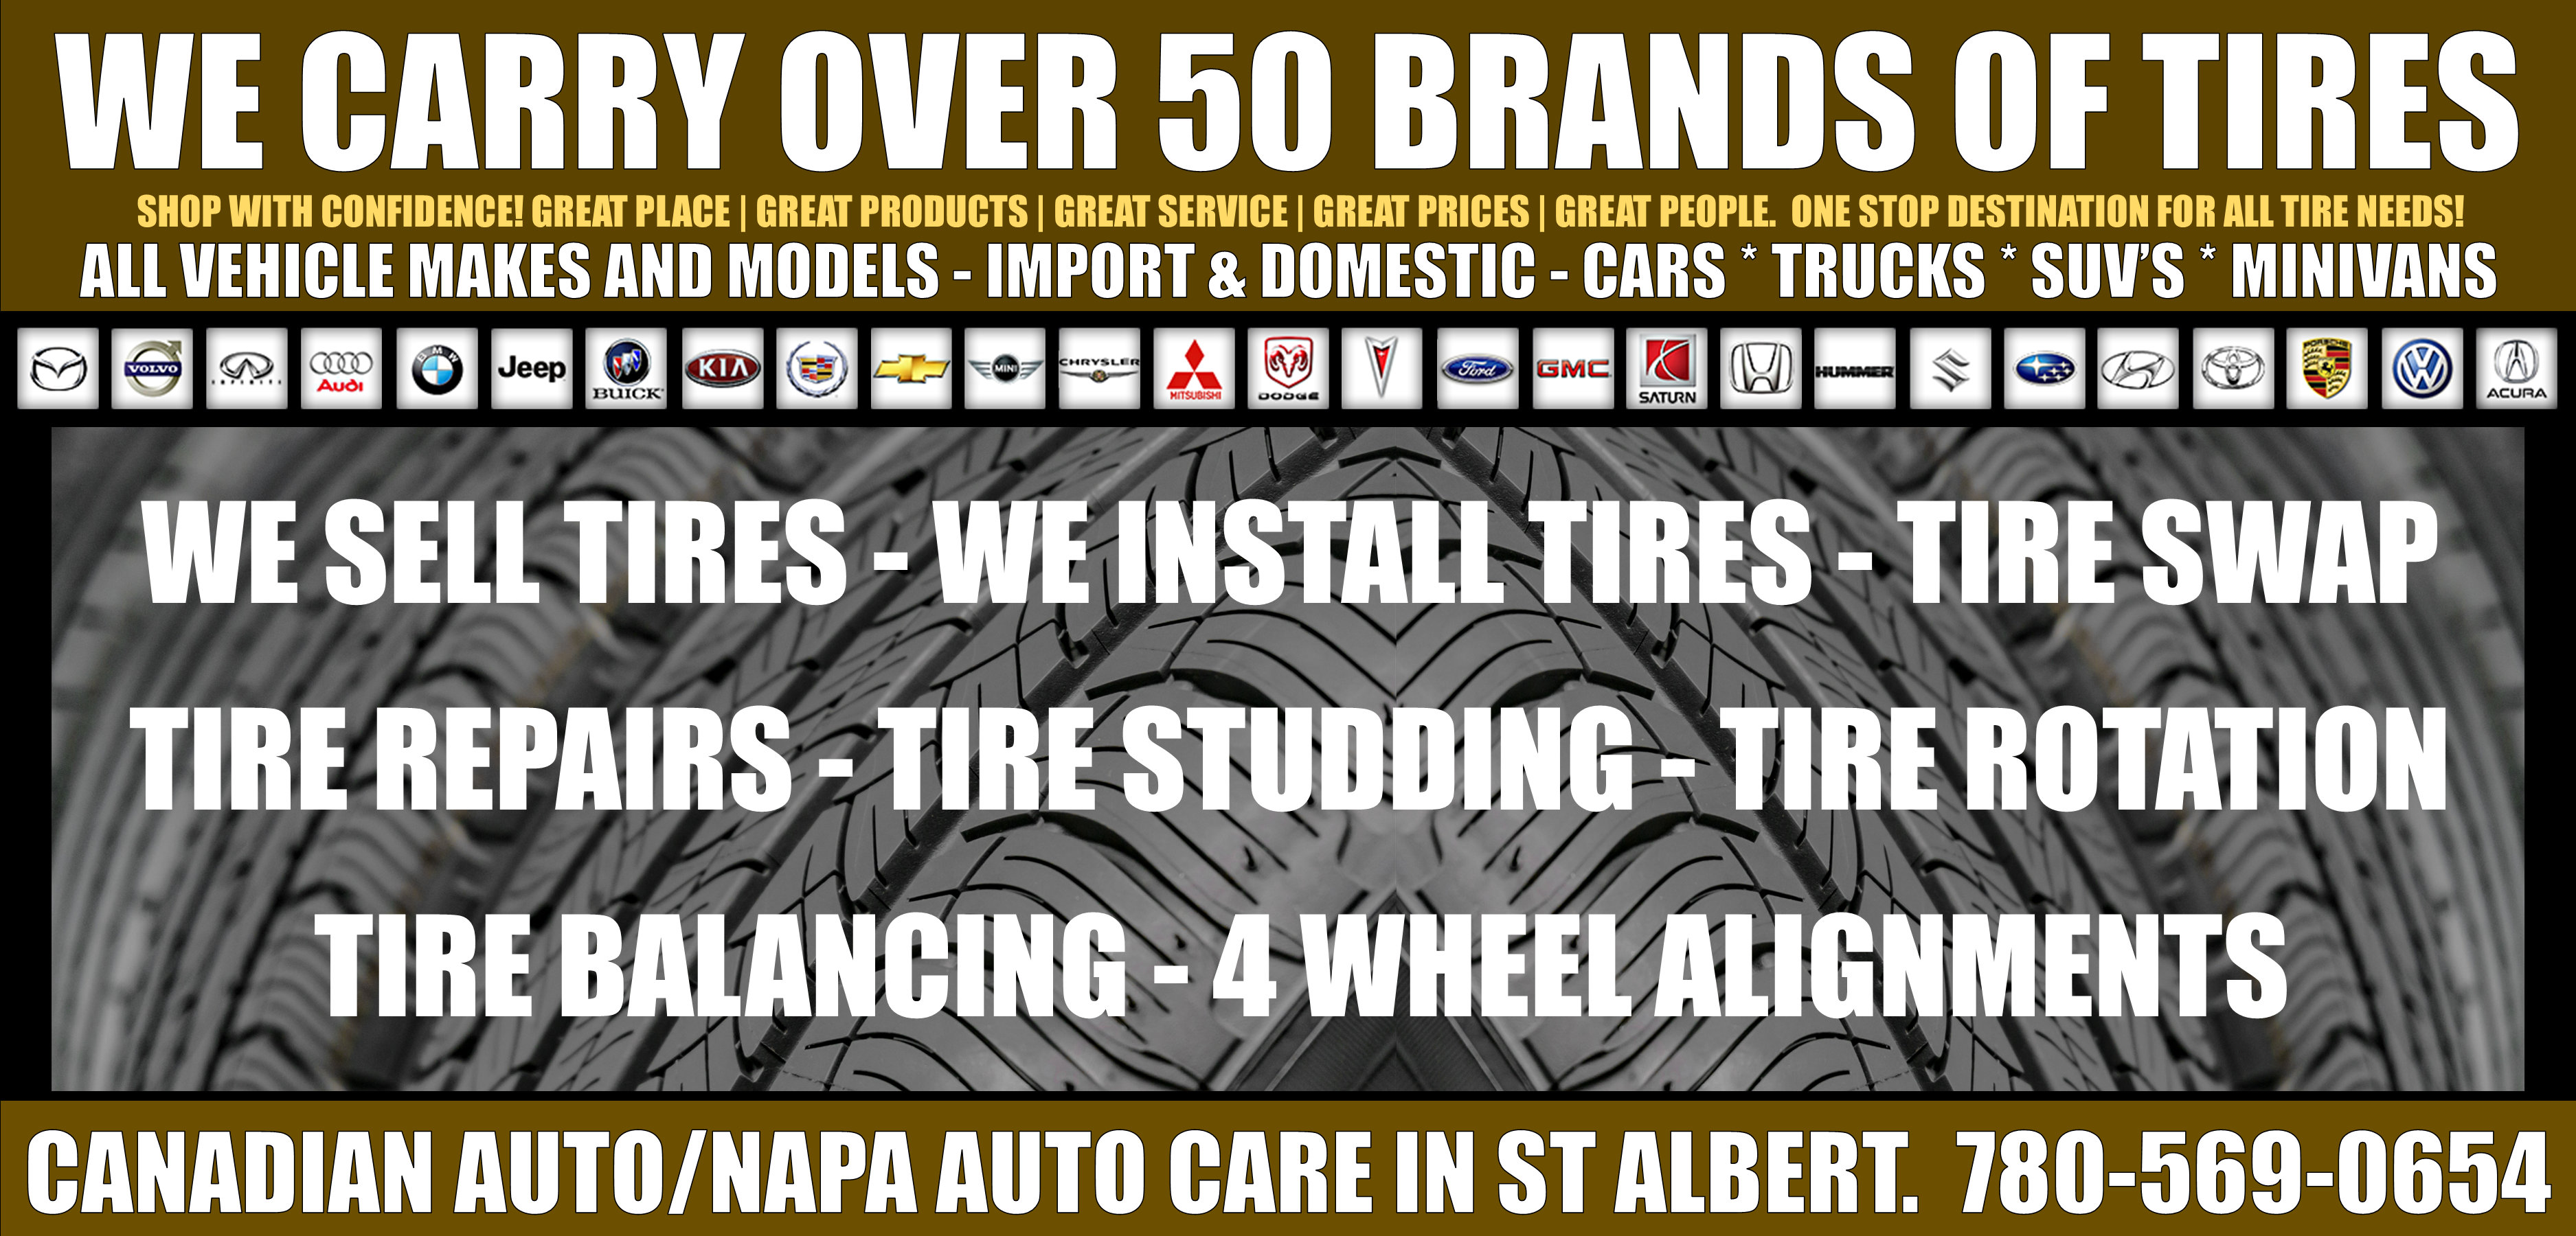 we sell and install all major tire brands for winter and summer tires